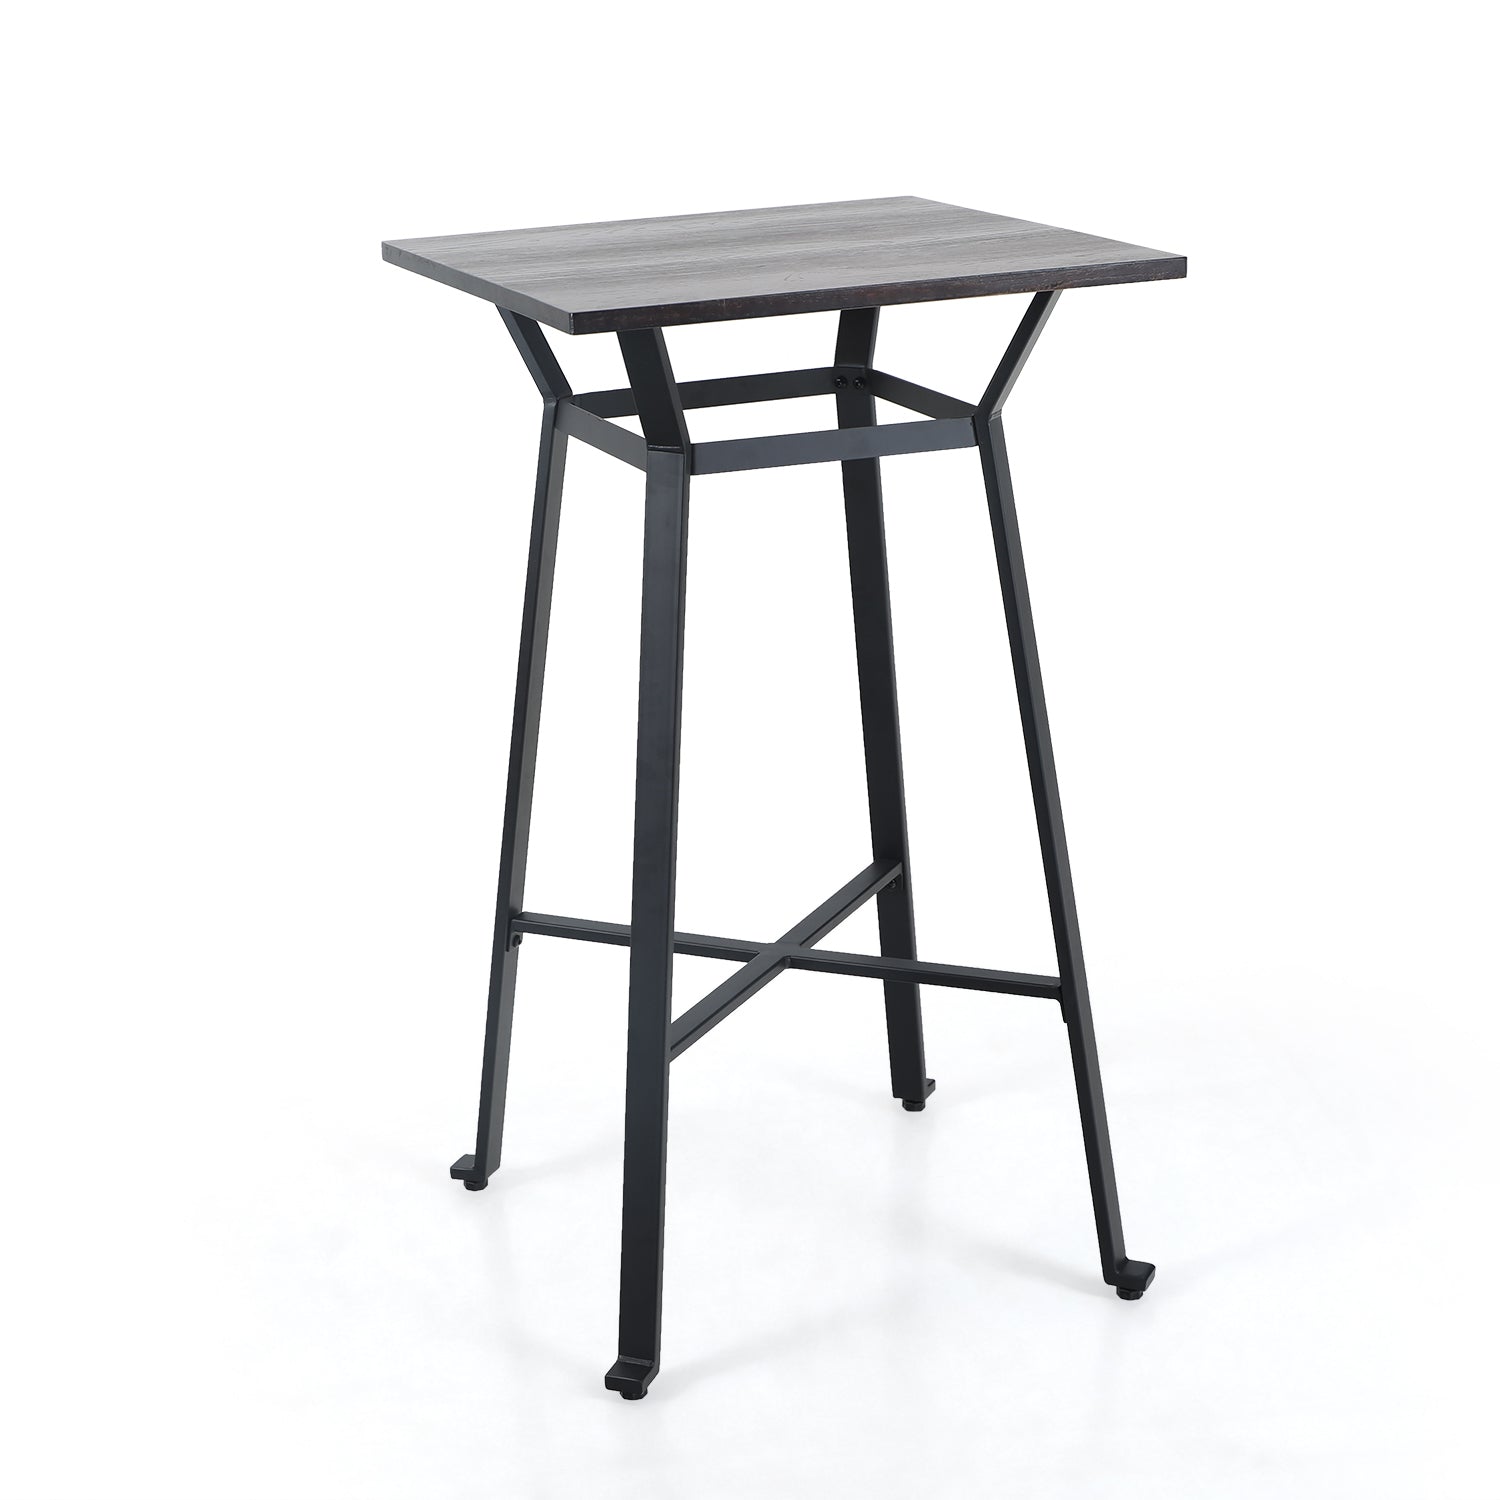 PHI VILLA Metal Bar Table, Square Bar Height Pub Table with Wood Top, 41"